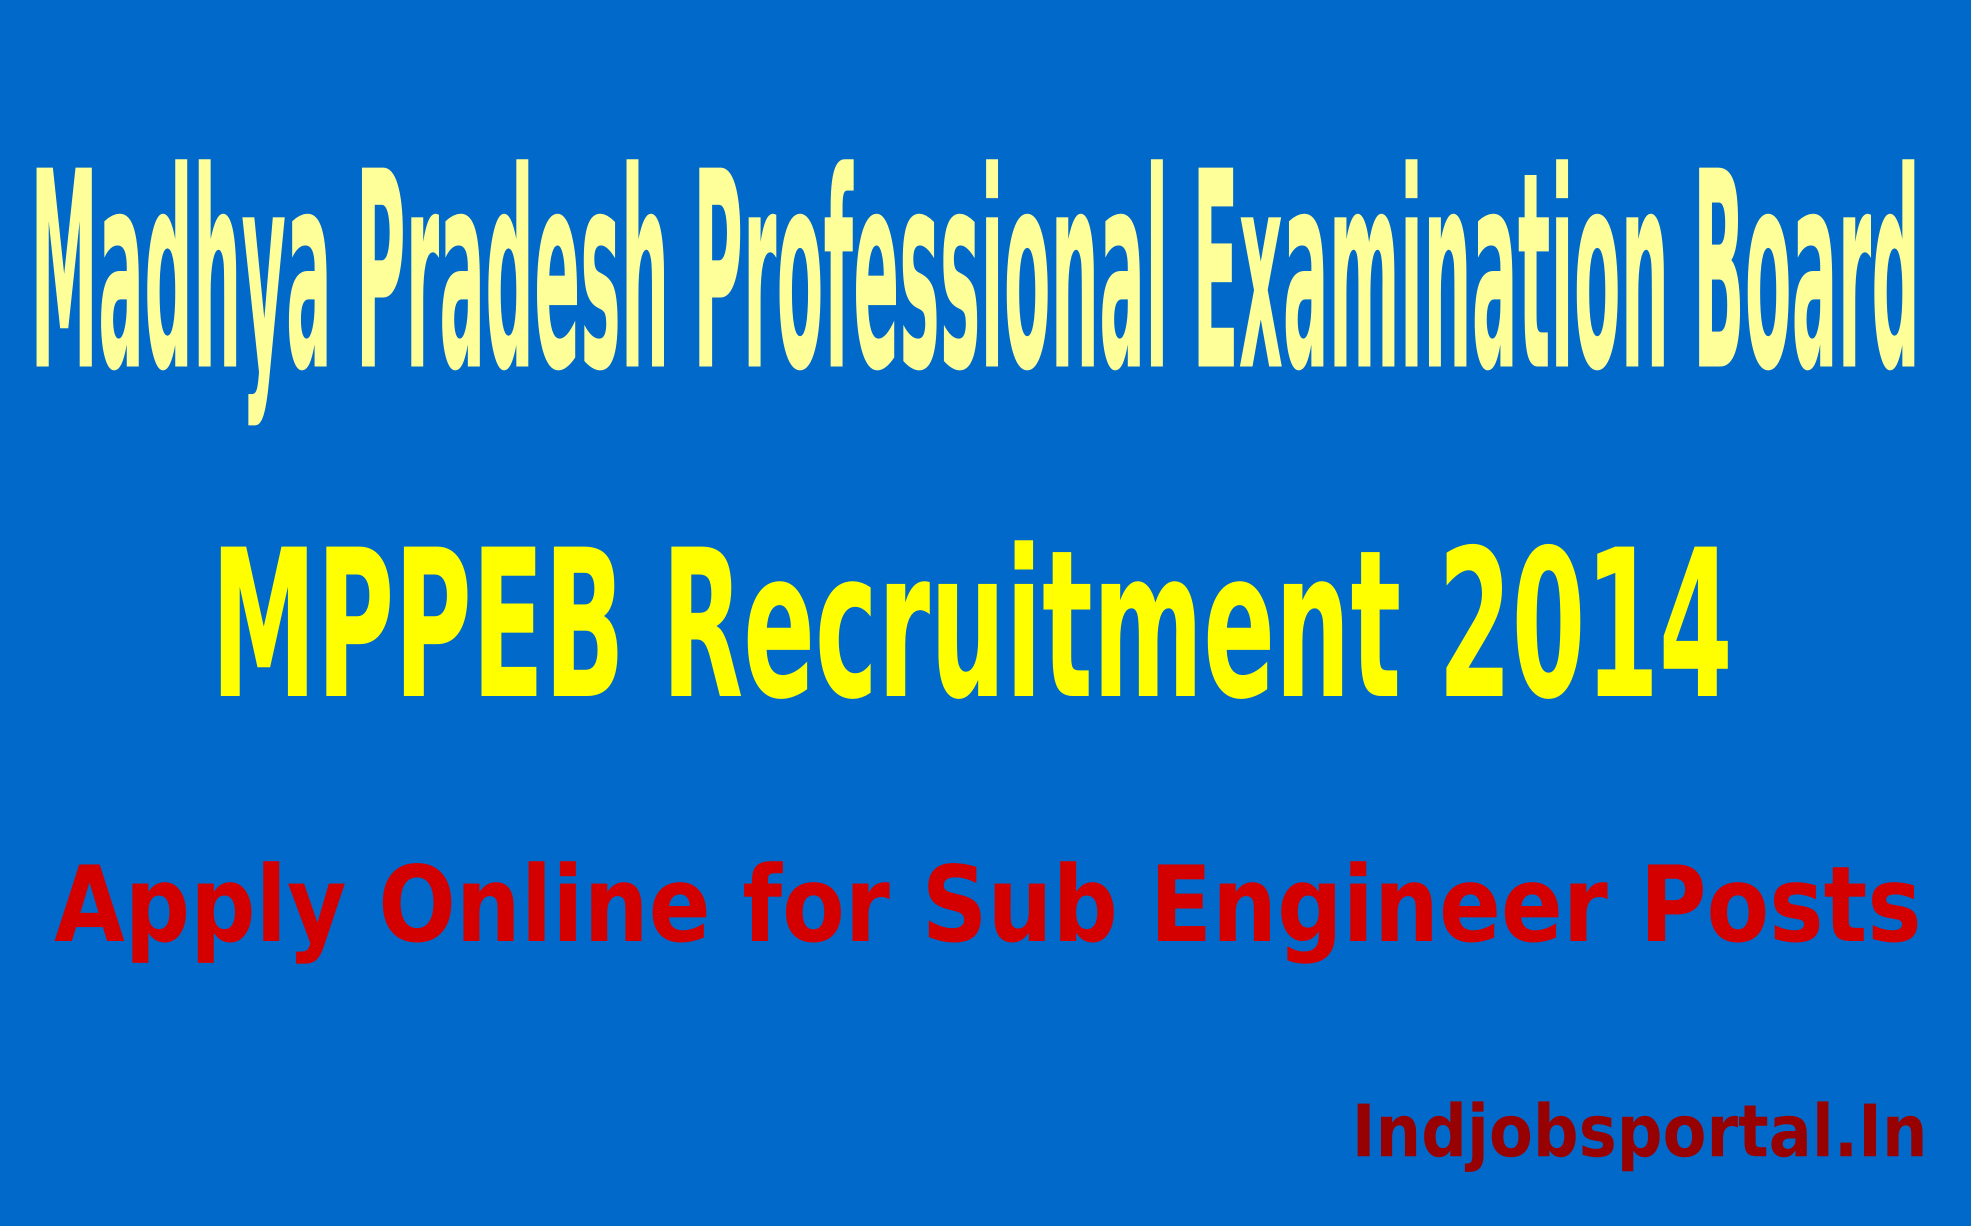 MPPEB Recruitment 2014 – Apply Online for Sub Engineer Posts